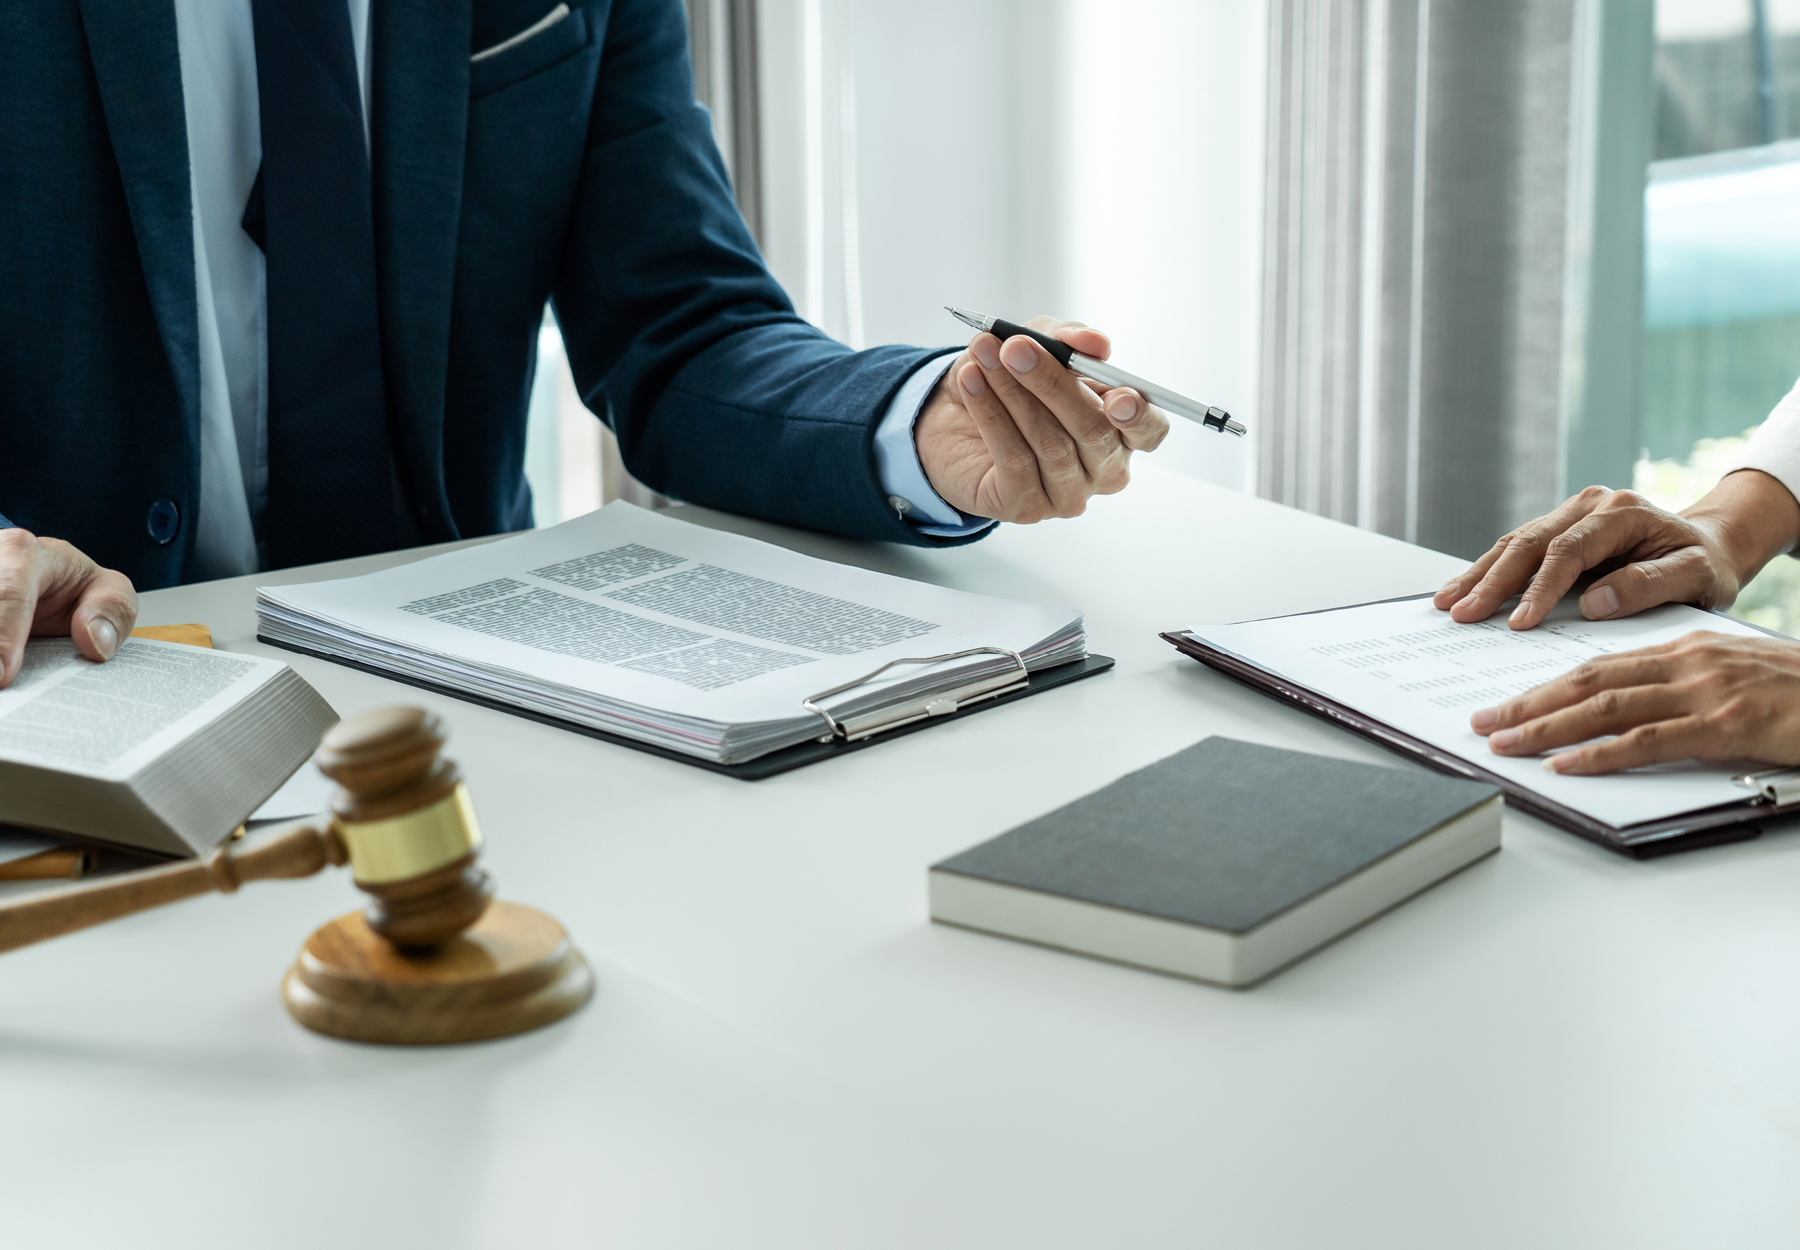 Closeup of lawyer and lab professional meeting at a white desk with books and papers and a gavel on it. iStock image.